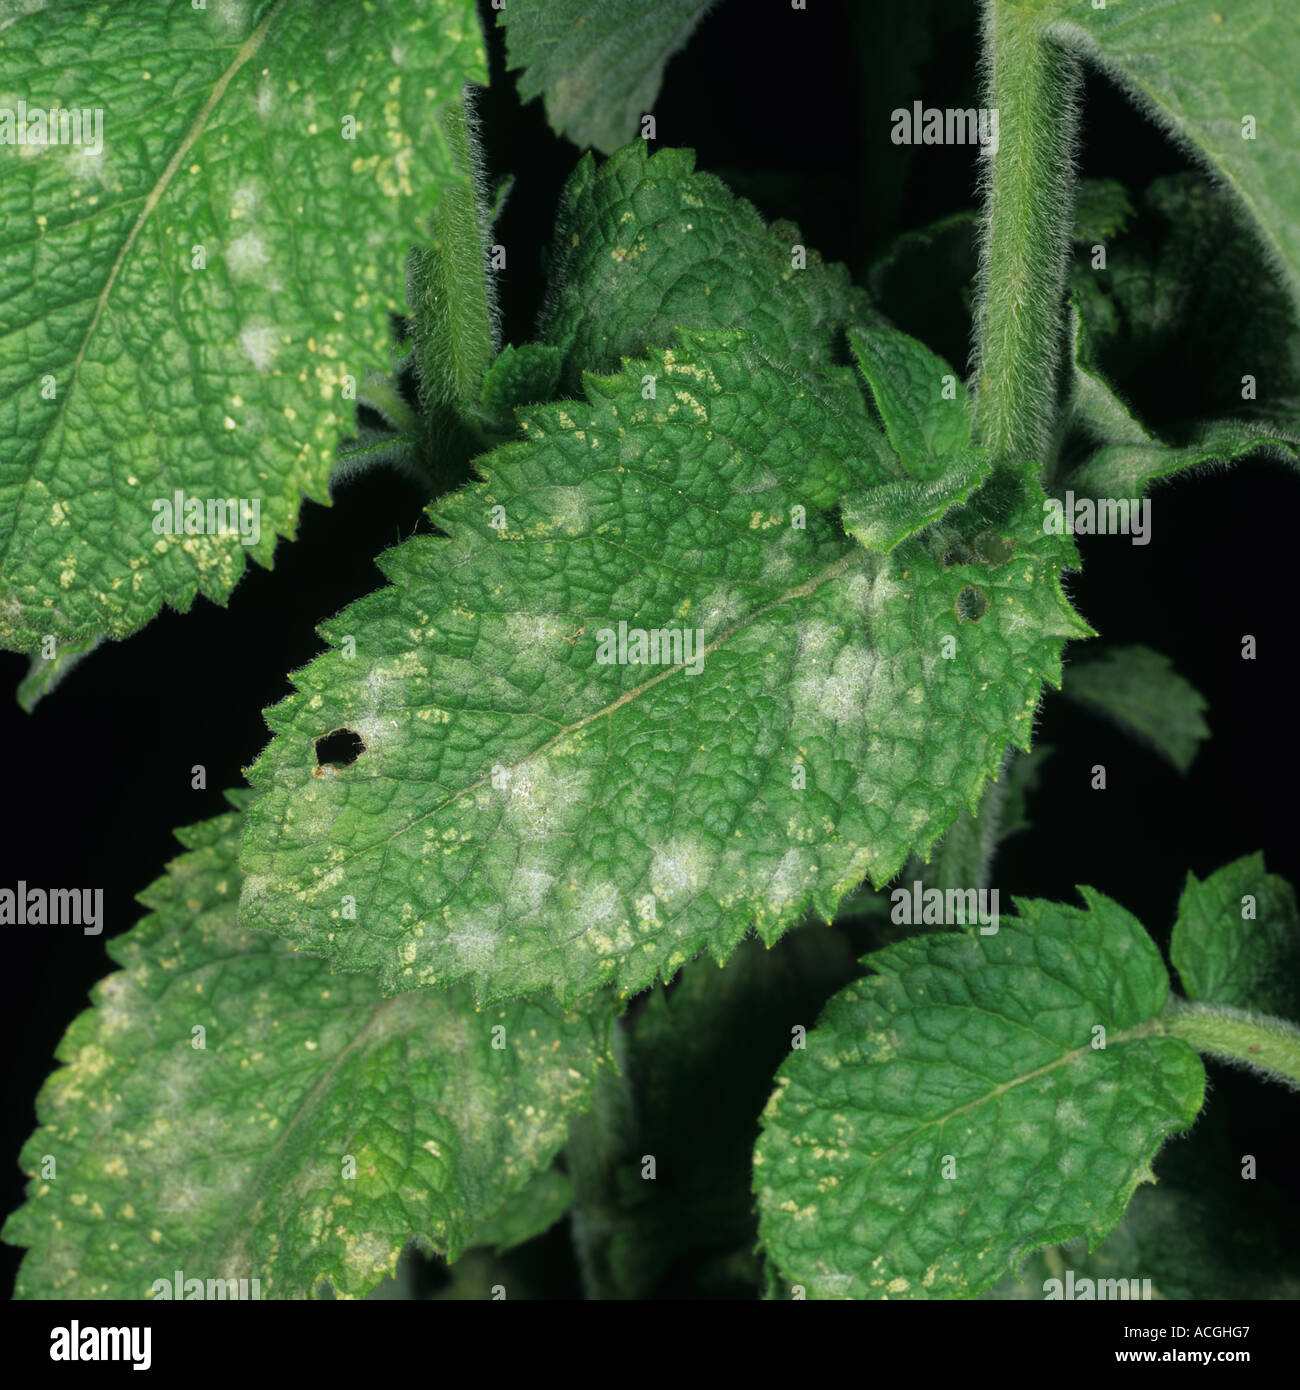 Powdery mildew on round leaved mint leaves Stock Photo